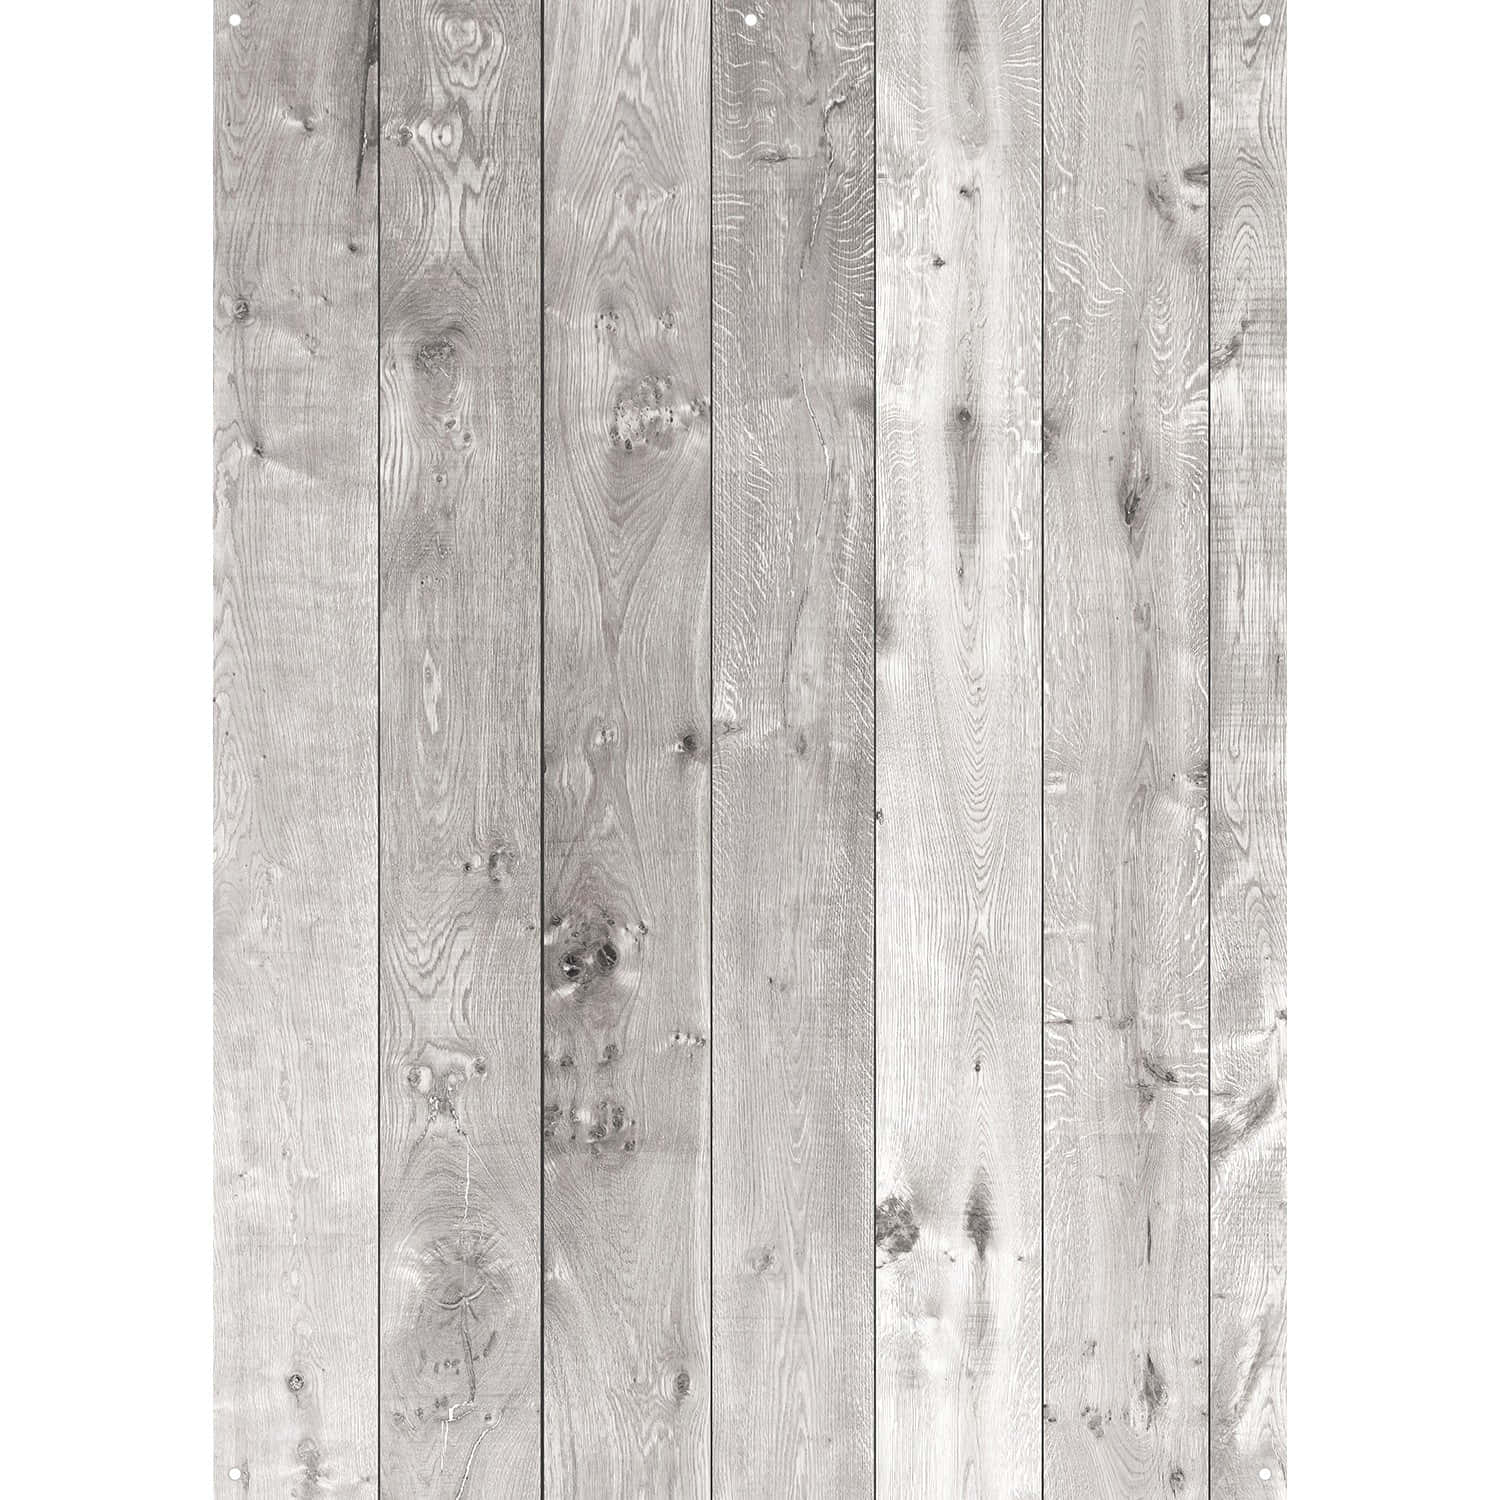 A White And Gray Wooden Wall With A White Background